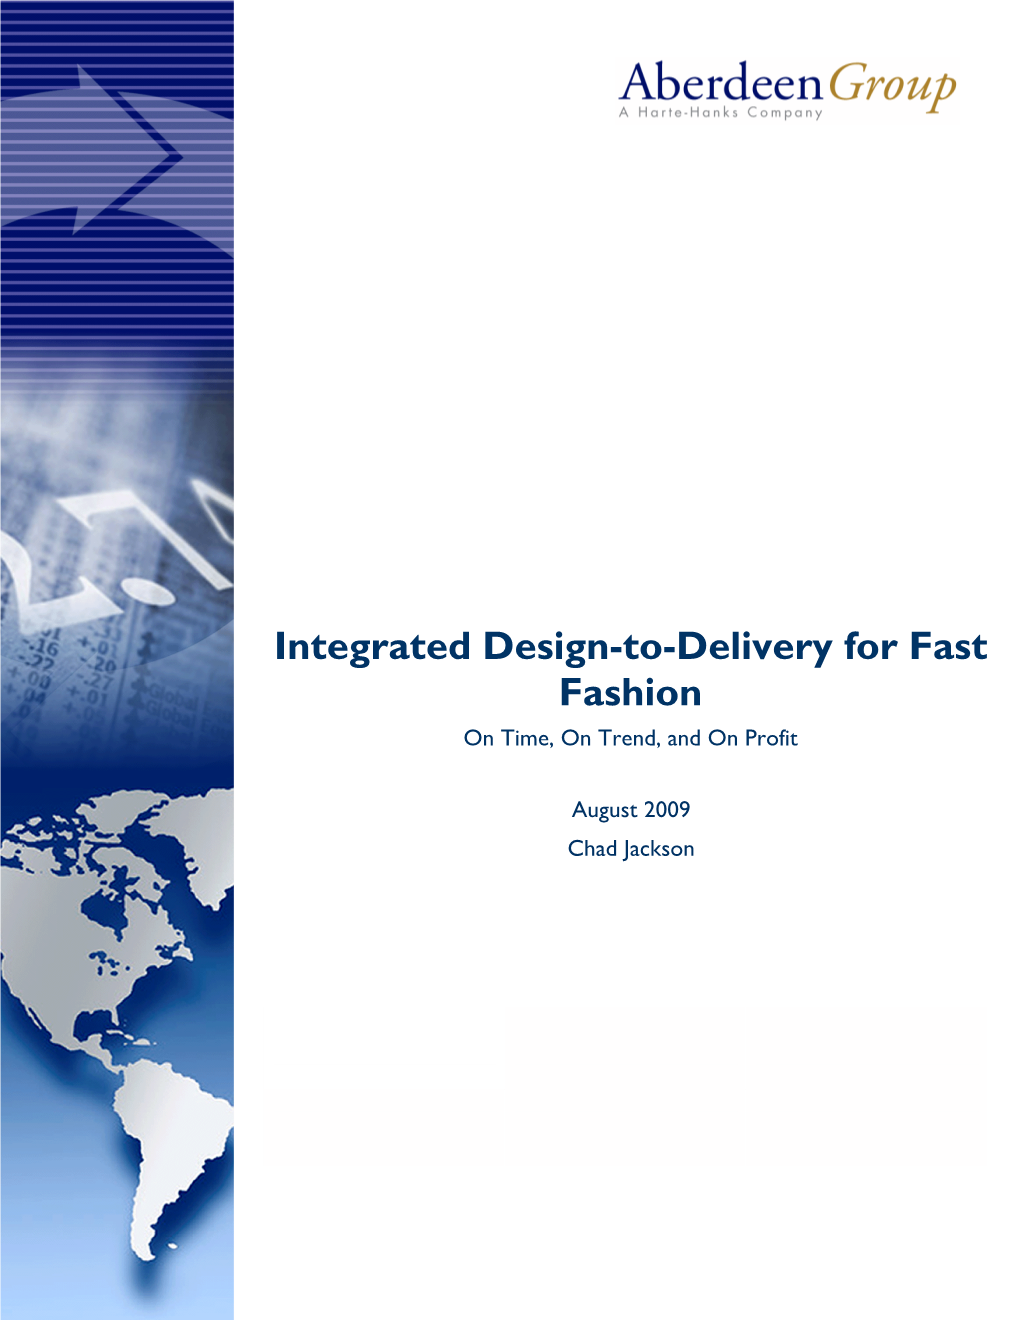 Integrated Design-To-Delivery for Fast Fashion on Time, on Trend, and on Profit